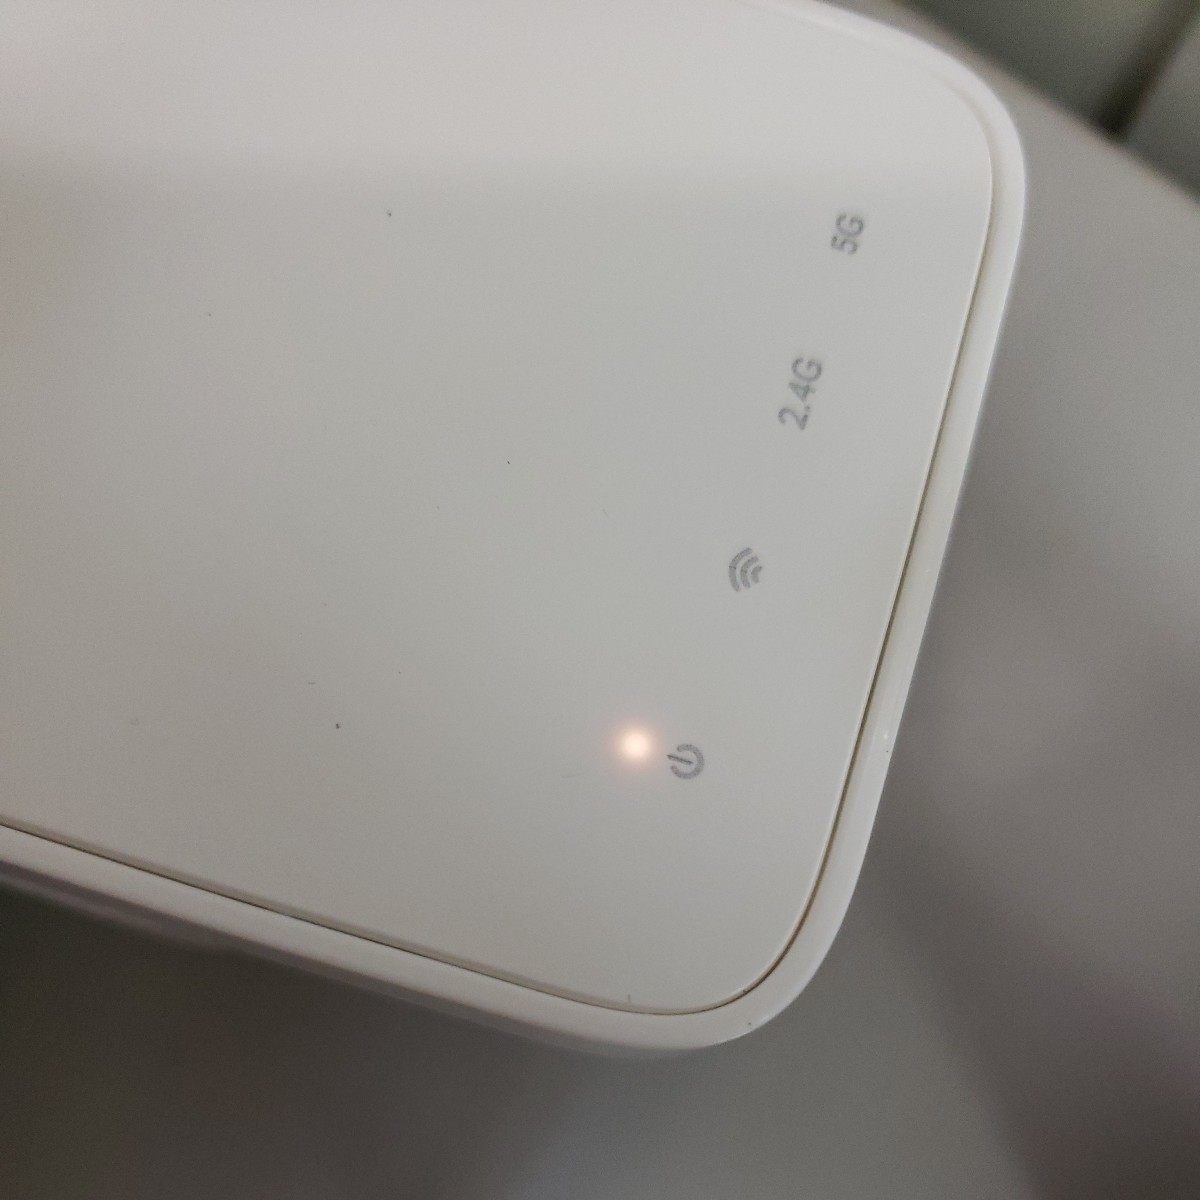 602y0710★TP-Link WiFi 無線LAN 中継機 Wi-Fi 5 11ac AC1200 866+300Mbps Wi-Fi中継機 コンパクト コンセント　RE330_画像2